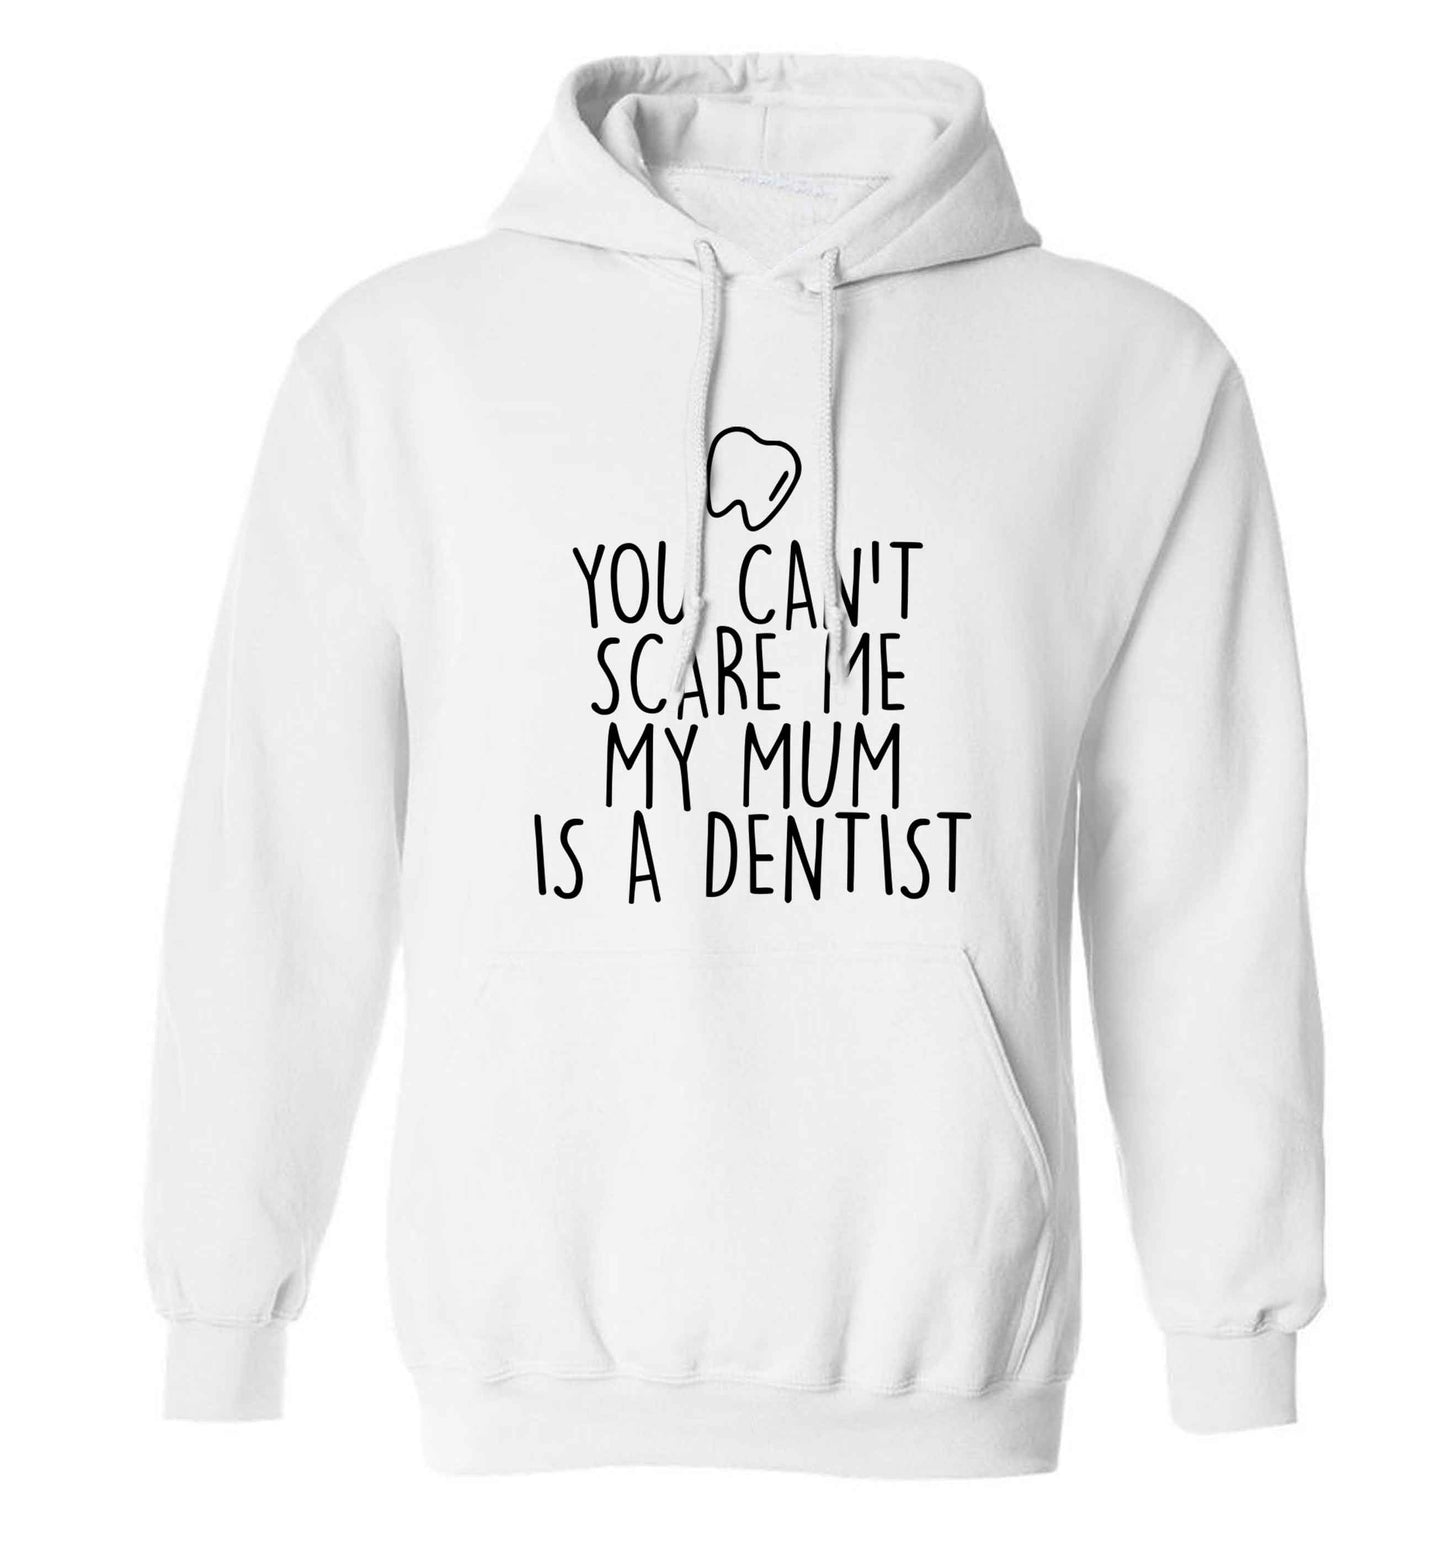 Minty Kisses Tooth Fairy (a) adults unisex white hoodie 2XL